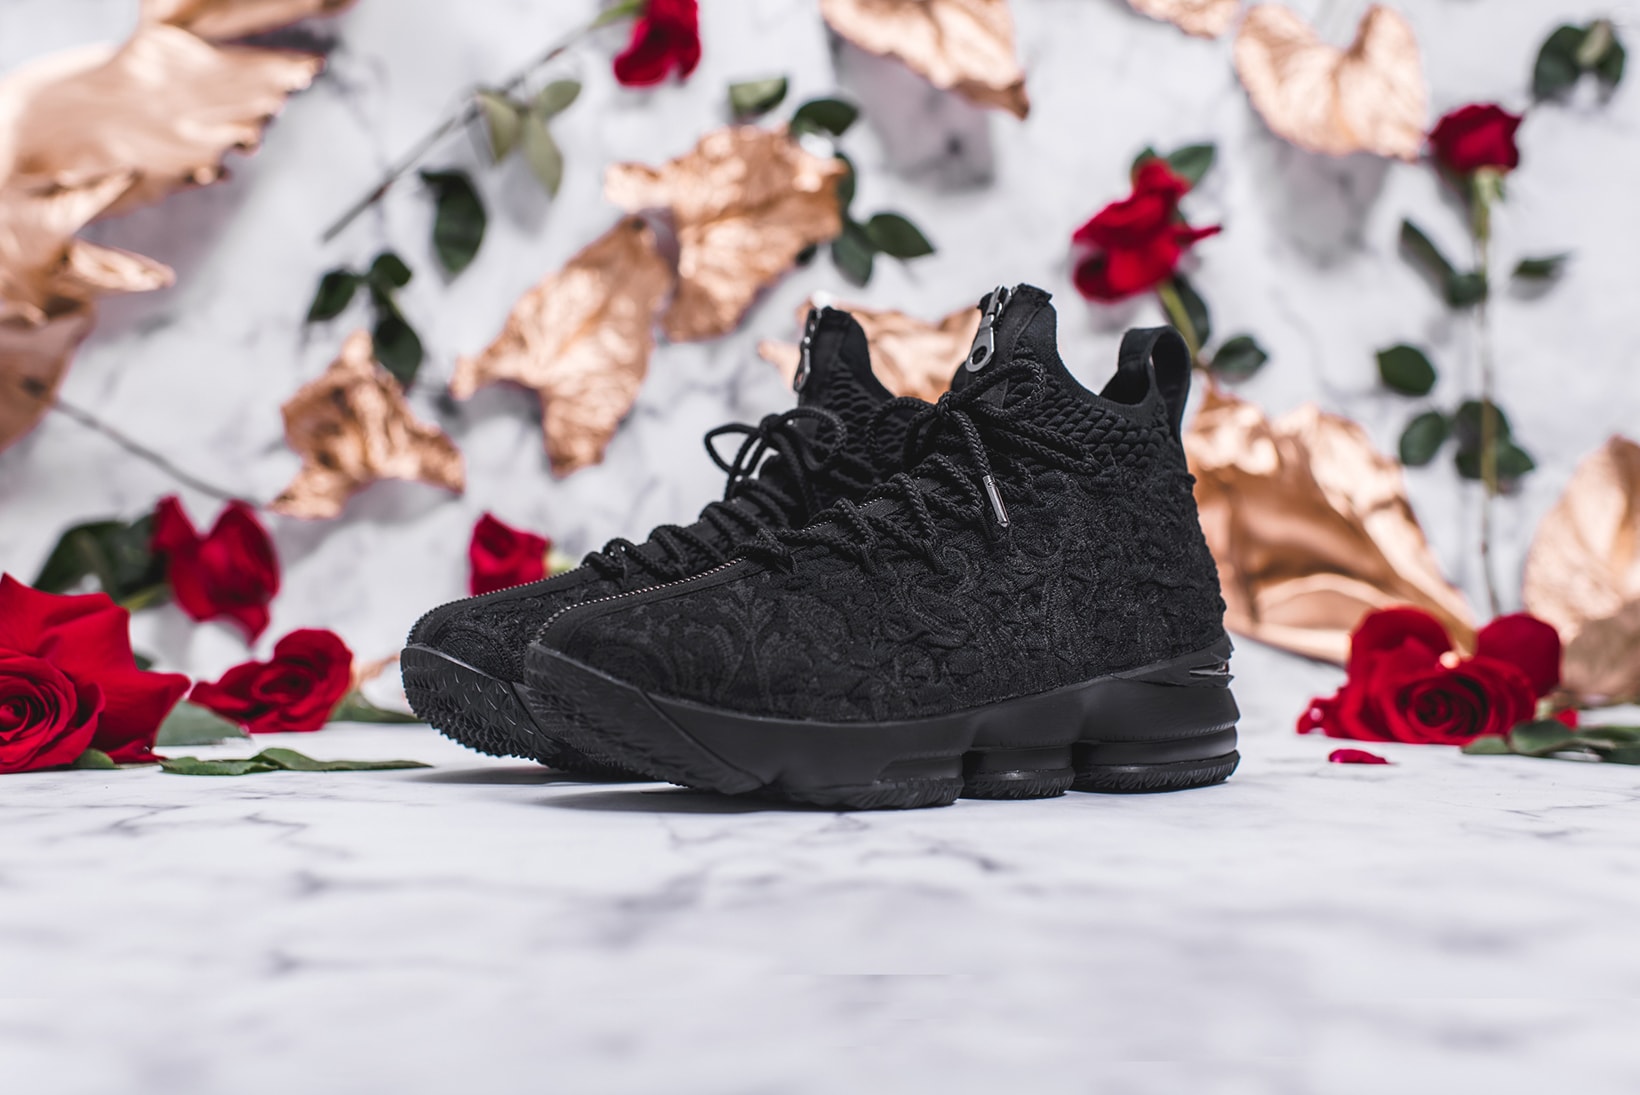 KITH Long Live the King Collection Chapter 2 LeBron James Ronnie Fieg Nike Basketball 15 xv sneakers black floral flower embroidery embroider white green gold red los angles all star weekend nba release info